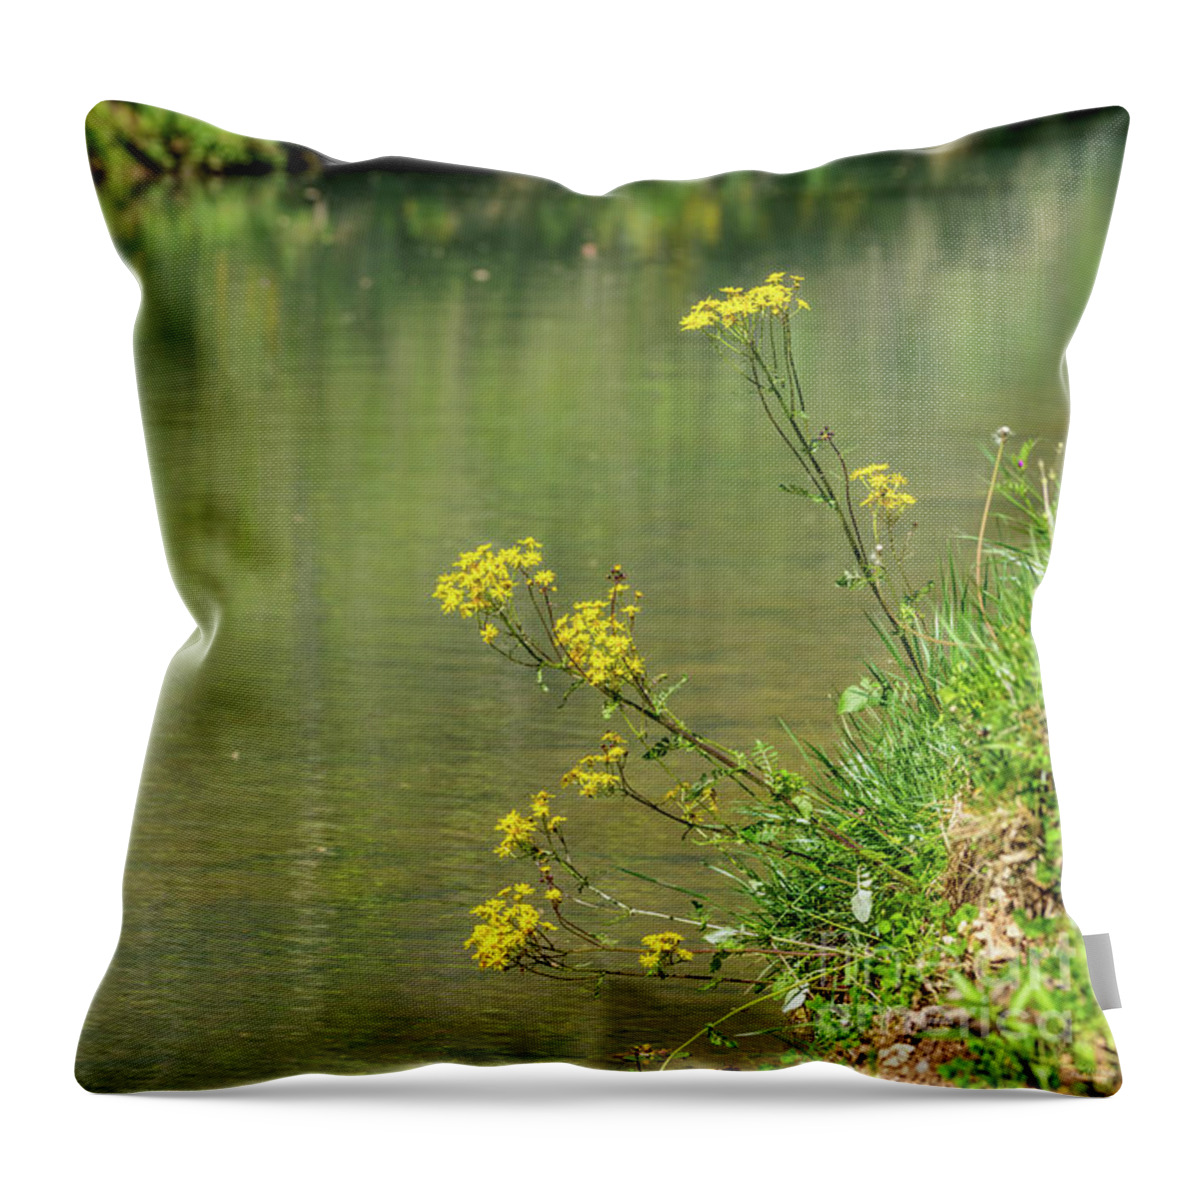 Wildflowers Throw Pillow featuring the photograph Wild Yellow Daisies Along The Creek by Jennifer White